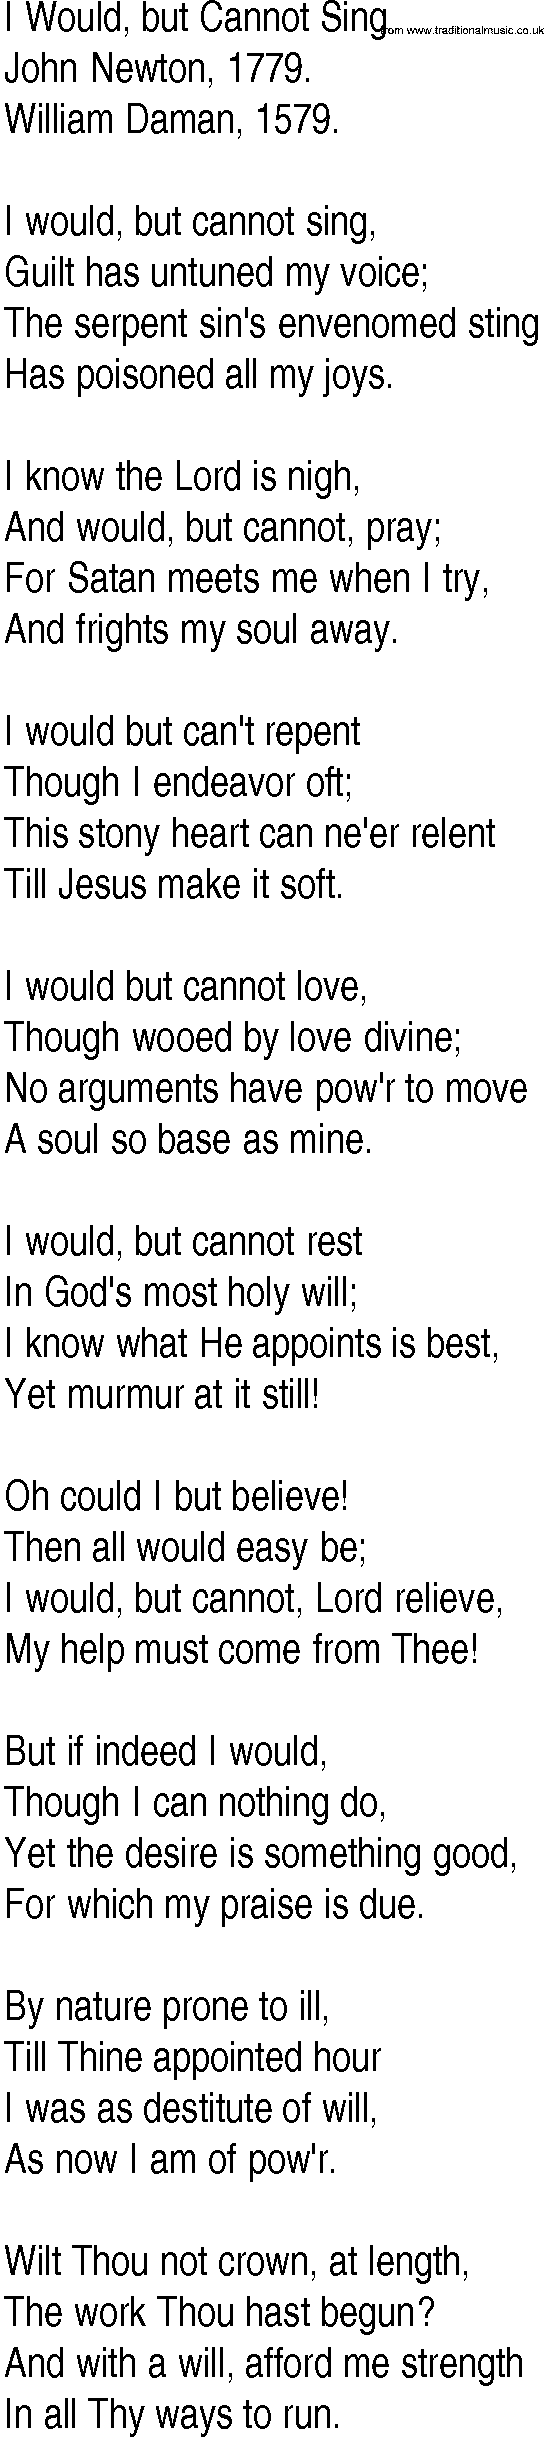 Hymn and Gospel Song: I Would, but Cannot Sing by John Newton lyrics